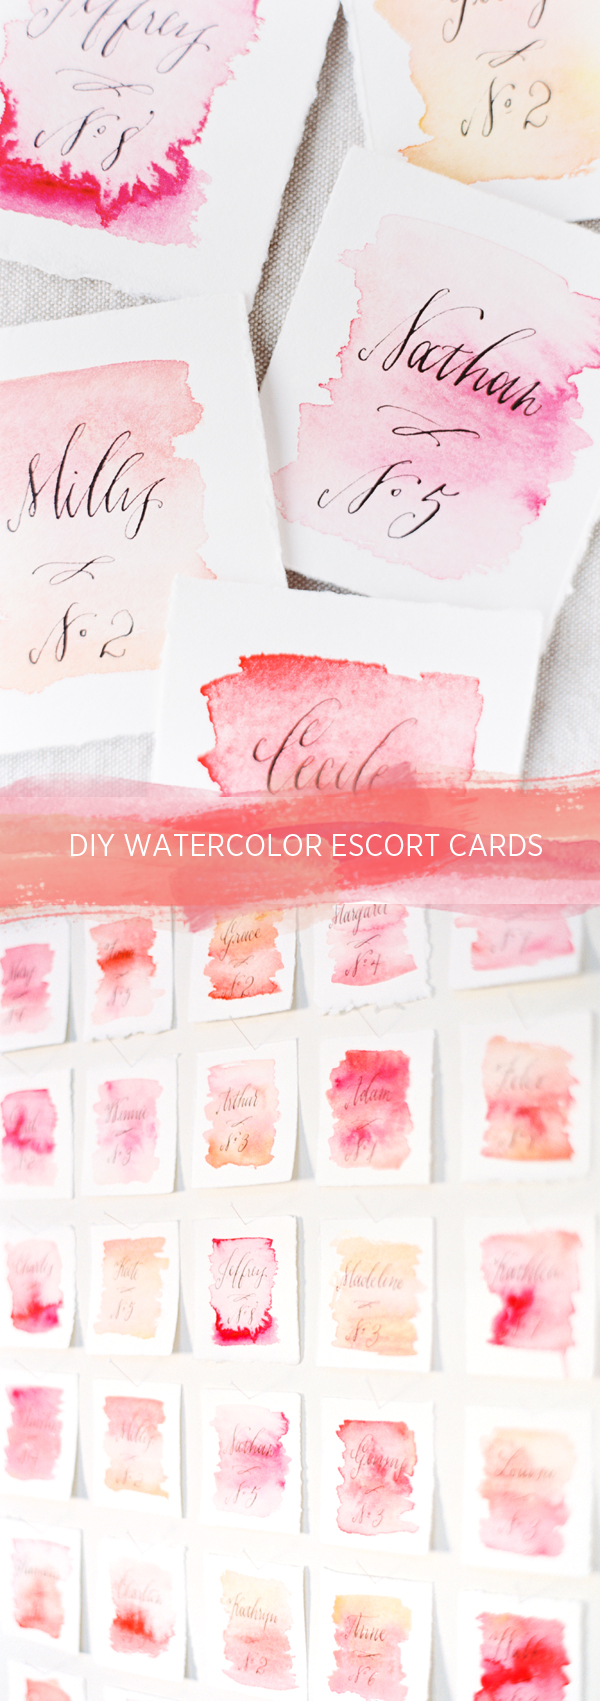 DIY How to Make Water Color Escort Cards